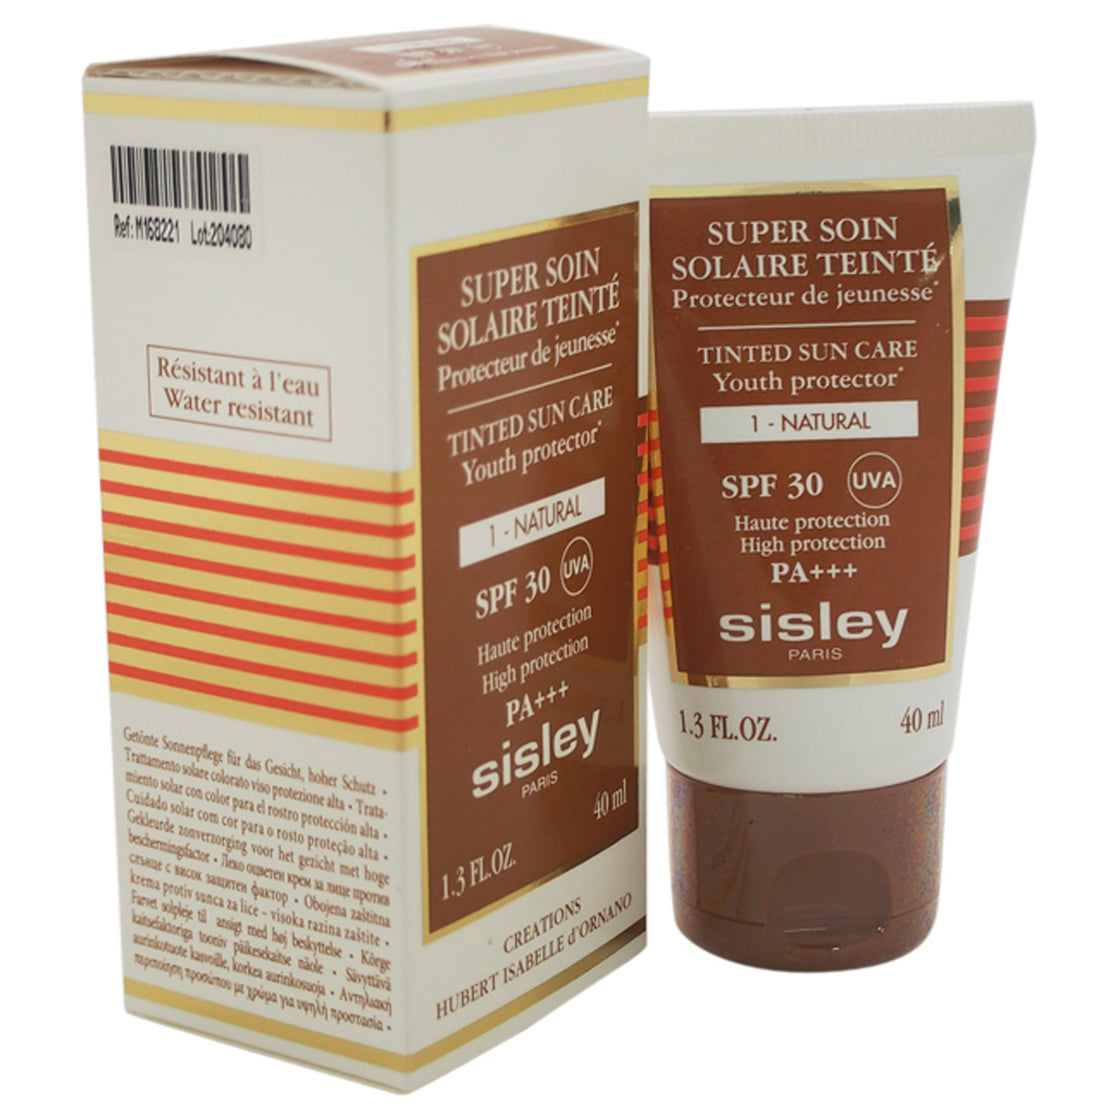 Super Soin Solaire Tinted Sun Care SPF 30 - 1 Natural by Sisley for Women - 1.3 oz Sun Care